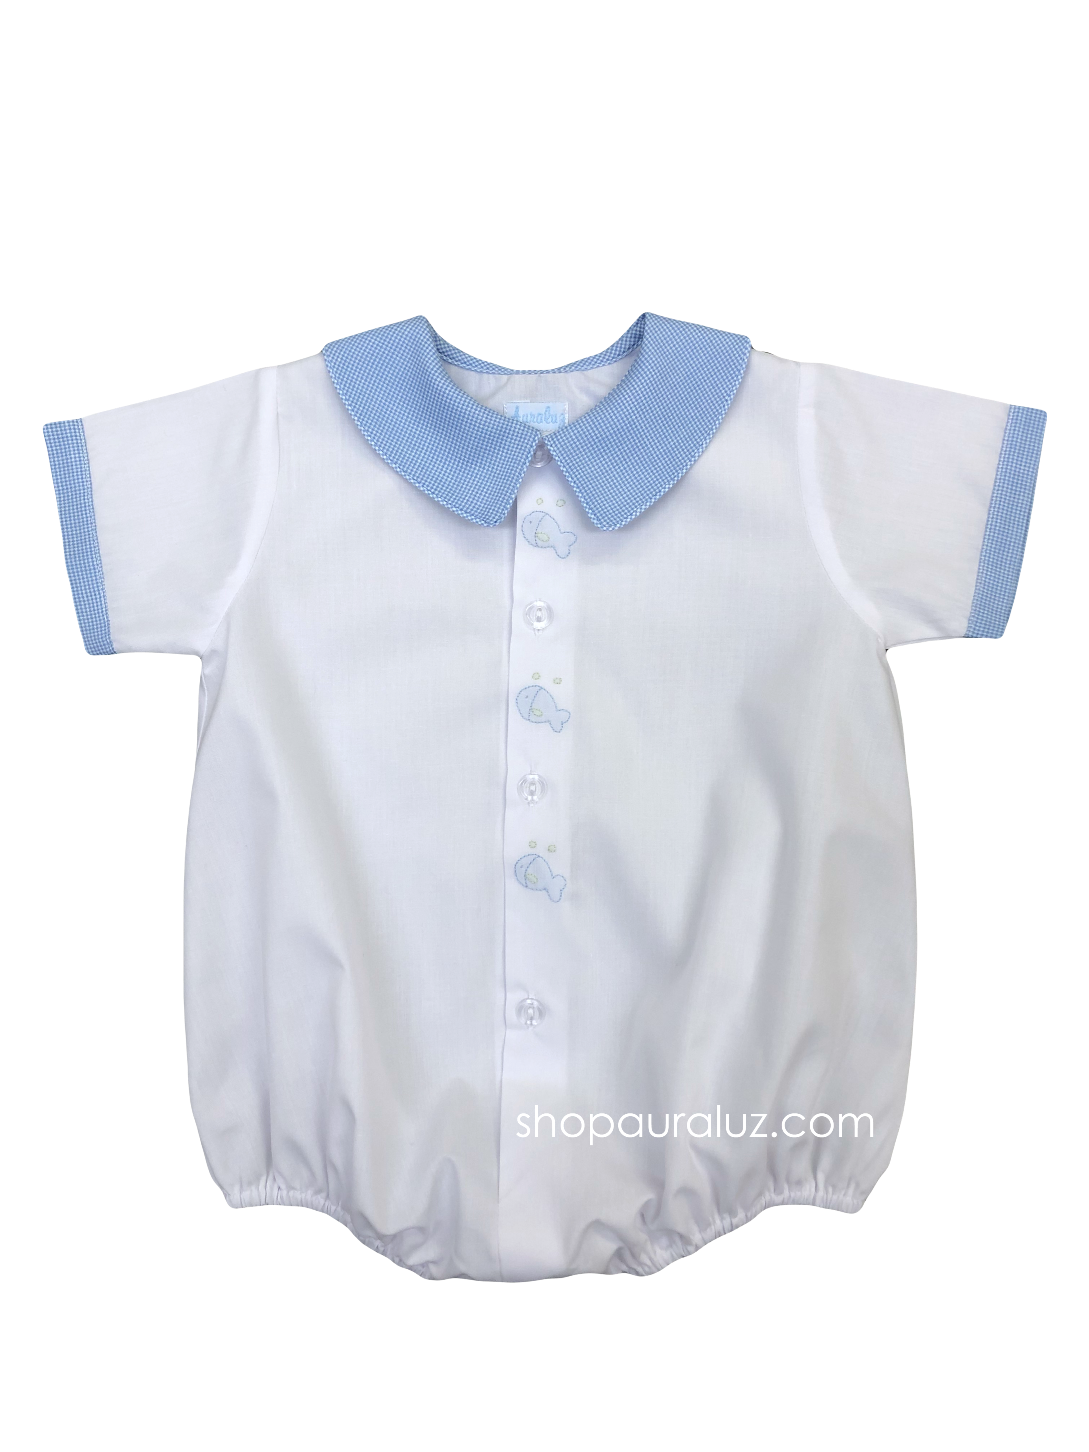 Auraluz Boy Bubble/Button-Front..White w/blue check boy collar and embroidered fish